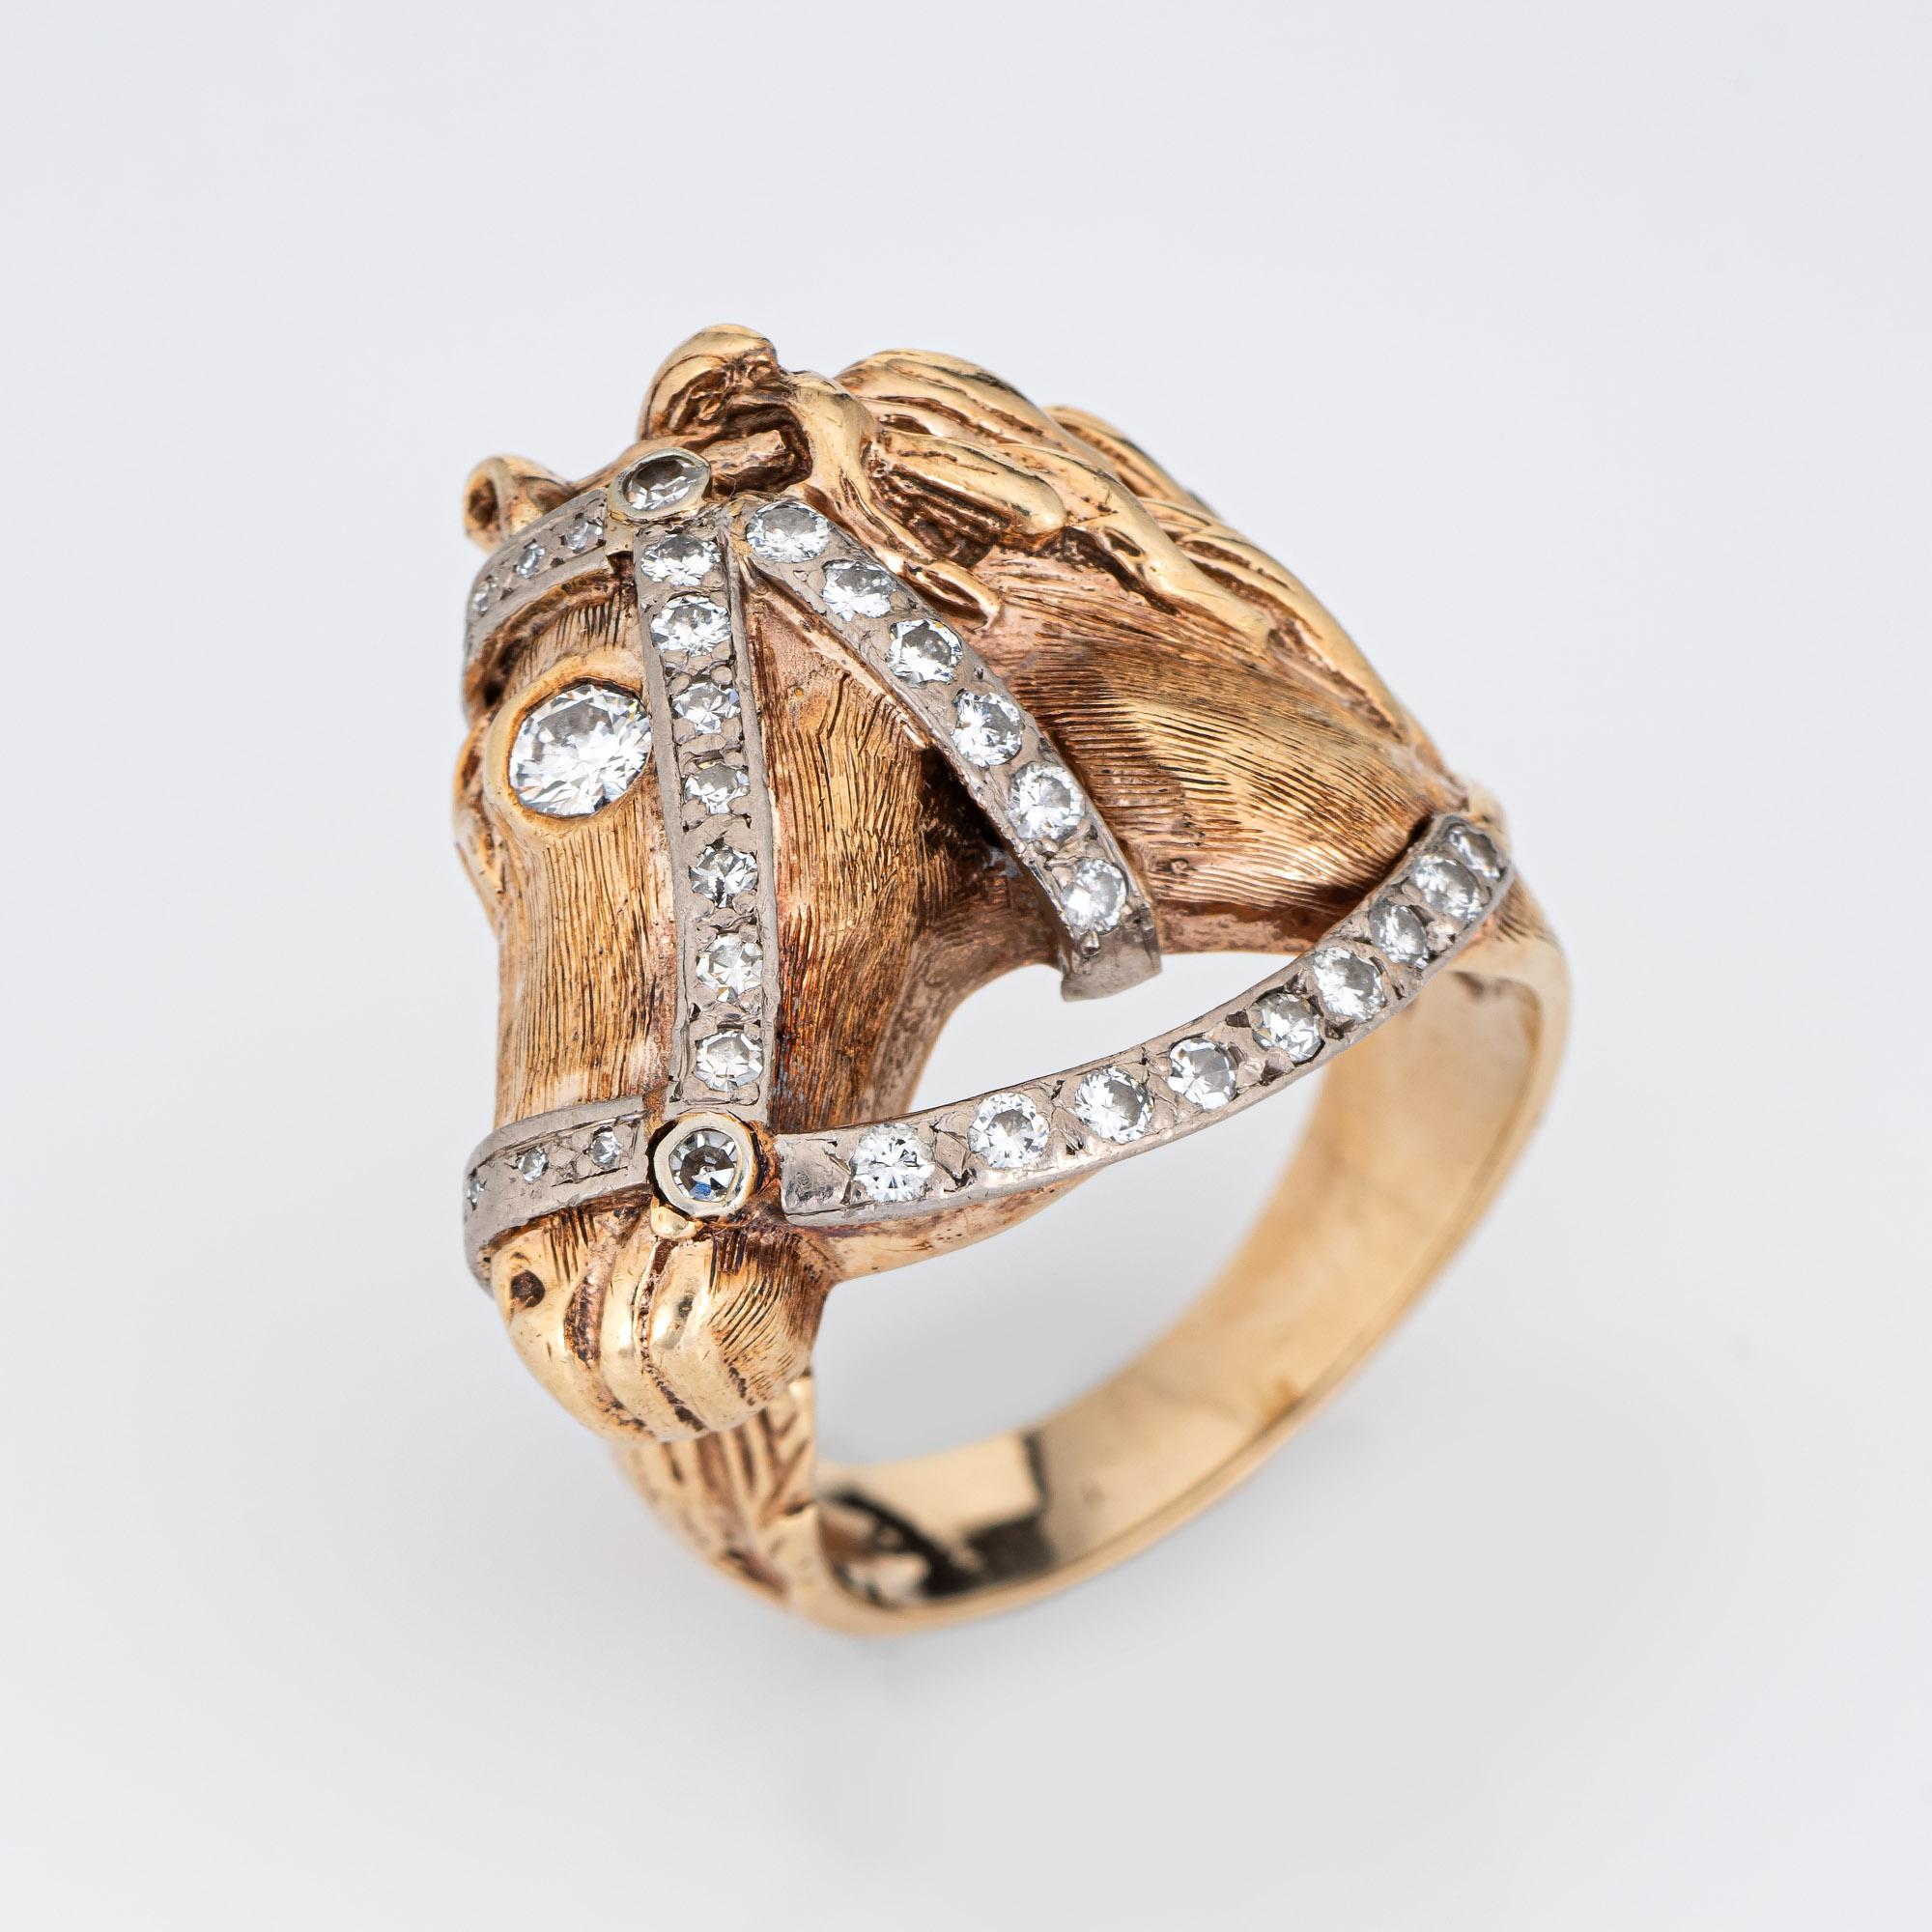 Stylish vintage diamond Horse ring (circa 1960s to 1970s) crafted in 14 karat yellow gold. 

Diamonds total an estimated 0.40 carats (estimated at H-I color and SI1-2 clarity).
The head of the horse wraps around the finger, with textured detail to